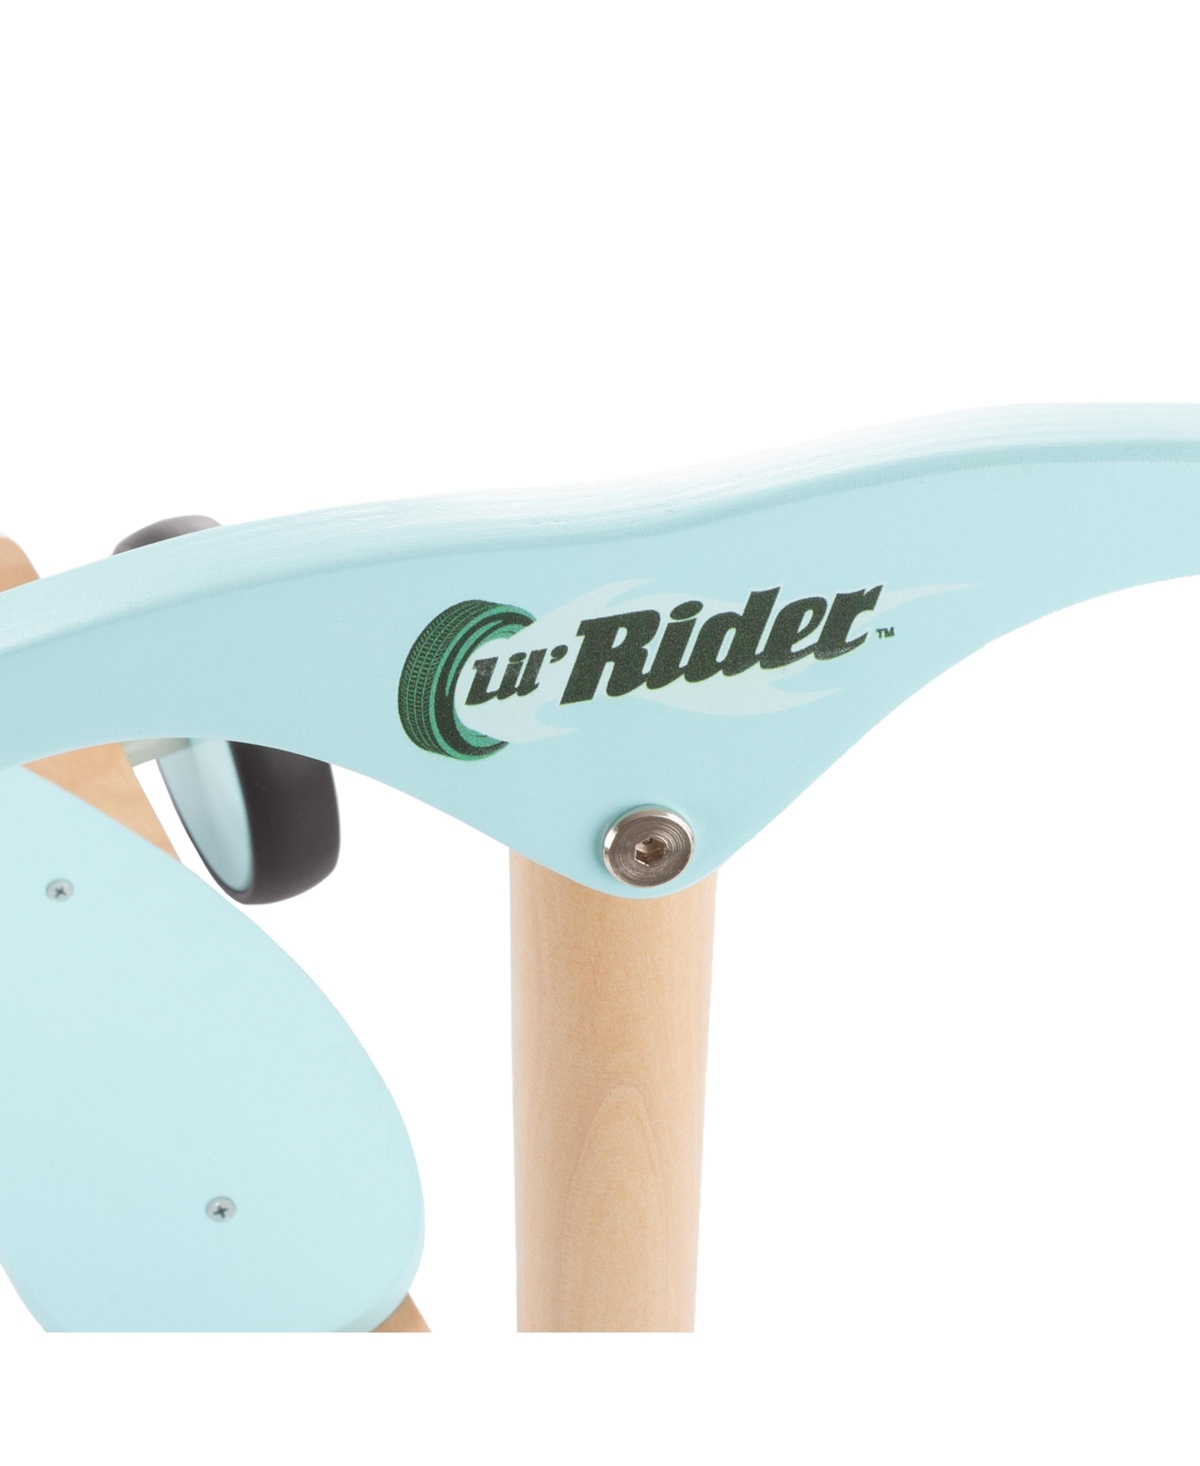 Shop Lil' Rider Kids Wooden Scooter In Light Blue